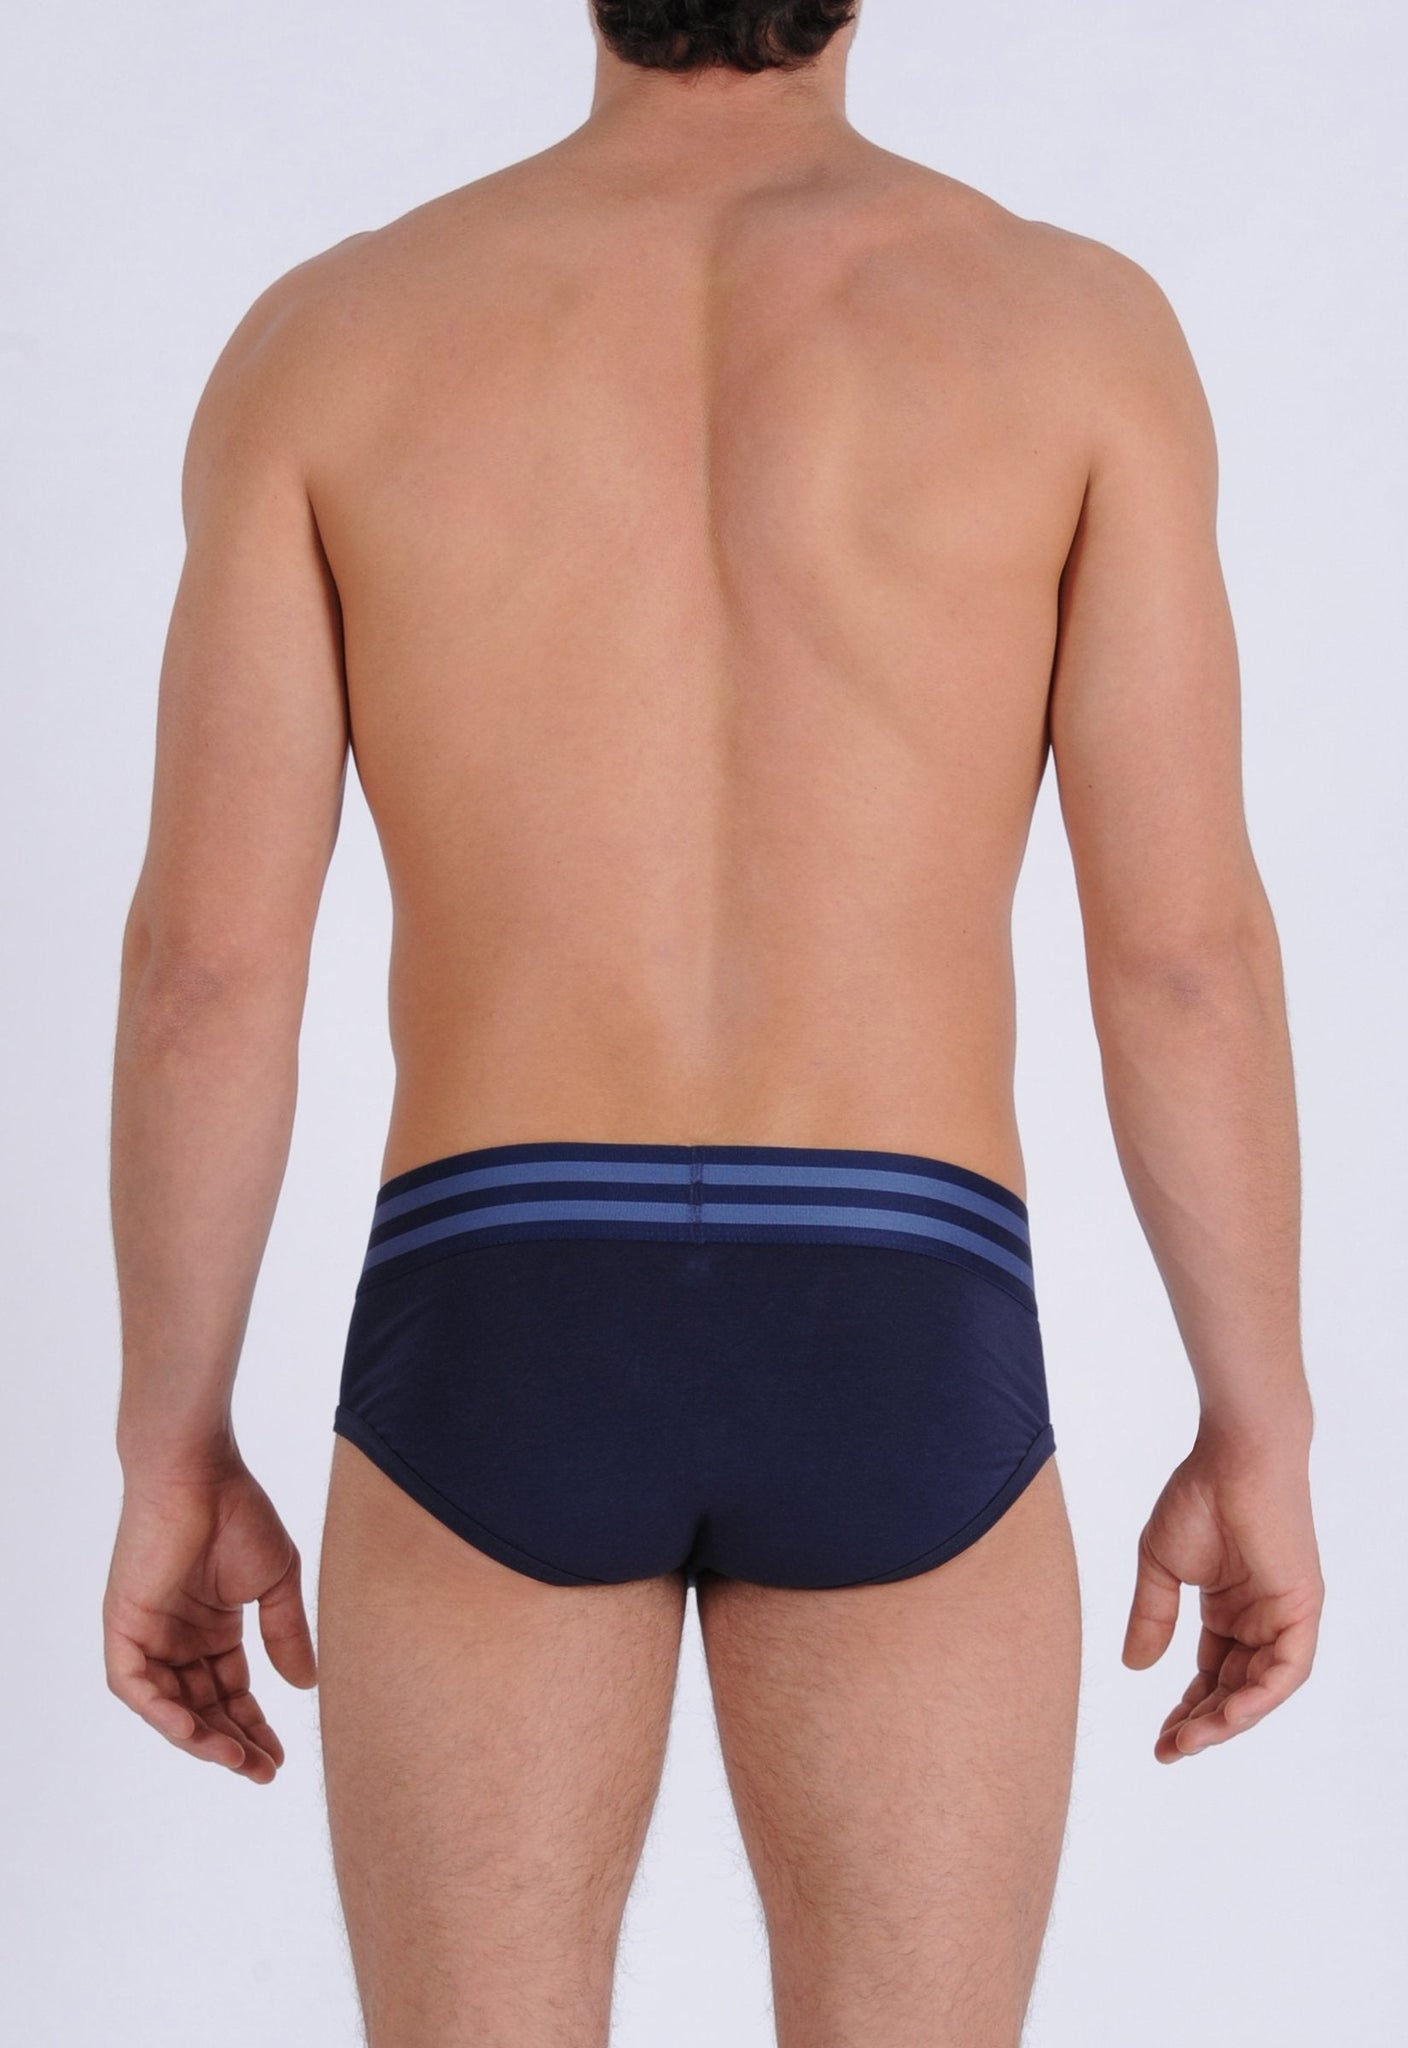 Ginch Gonch Men's Signature Series Underwear - Low Rise Brief navy printed thick waistband back